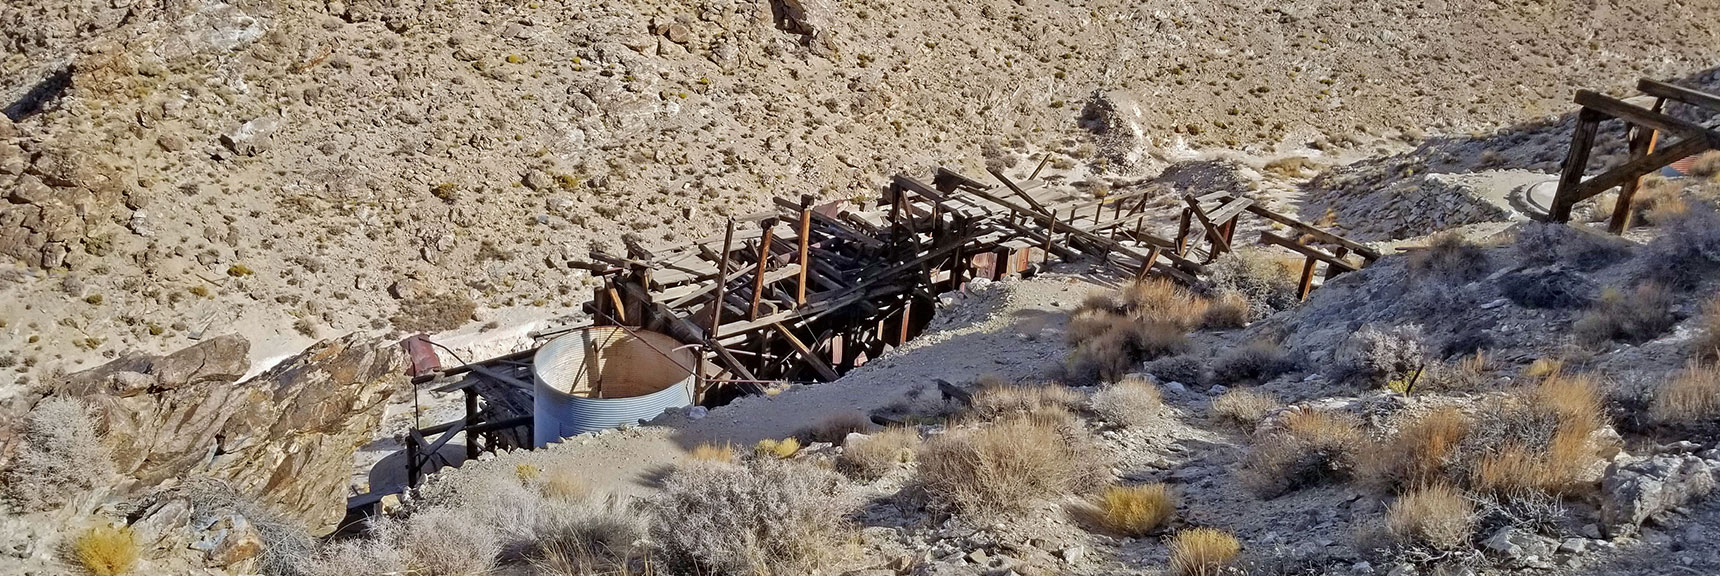 Skidoo Stamp Mill from Above. Huge Water Tank? | Skidoo Stamp Mill, Panamint Mountains, Death Valley National Park, CA